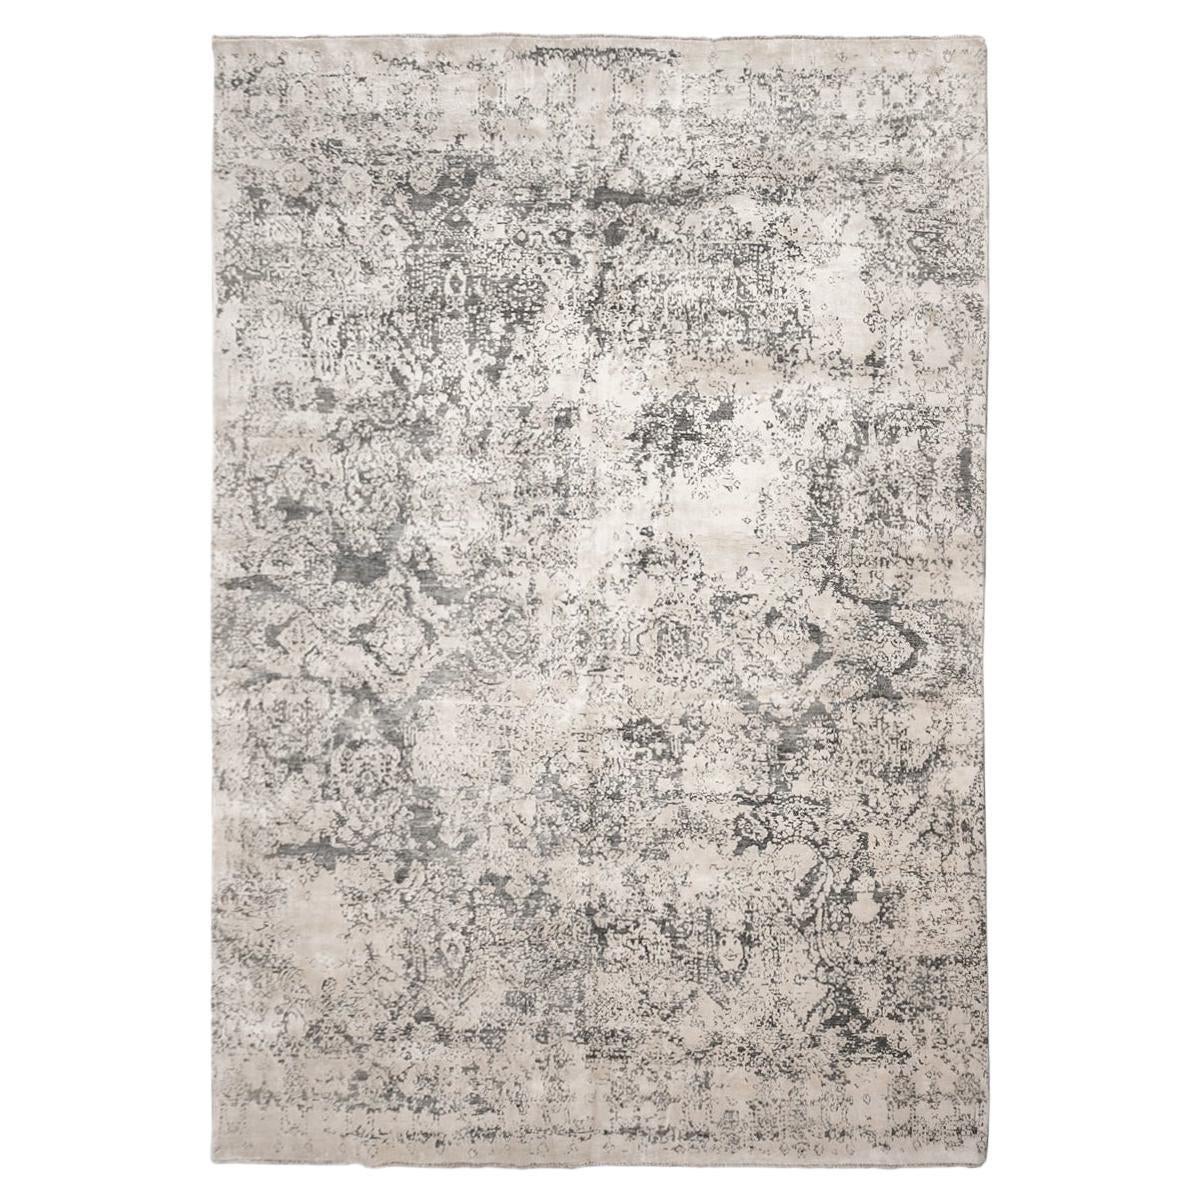 Abstract Rug Beige and Gray Design Handmade Silk and Wool.  3, 00 x 2, 00 m.